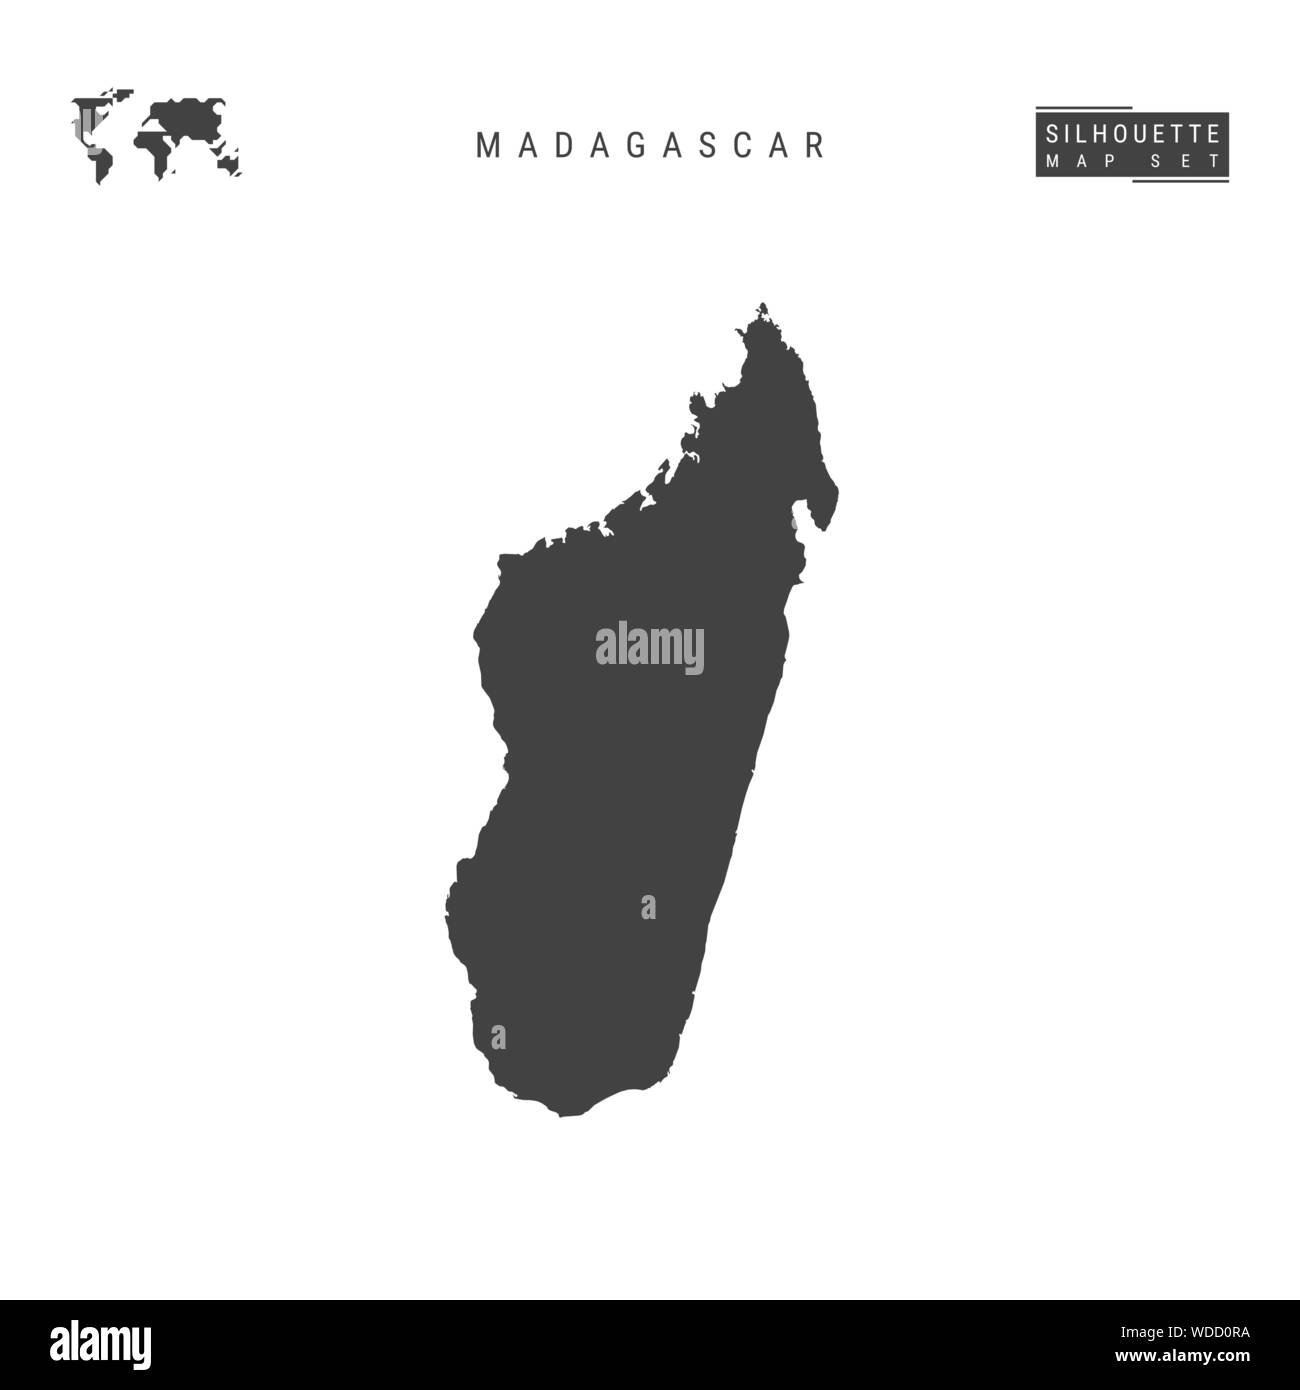 Madagascar Blank Vector Map Isolated on White Background. High-Detailed Black Silhouette Map of Madagascar. Stock Vector